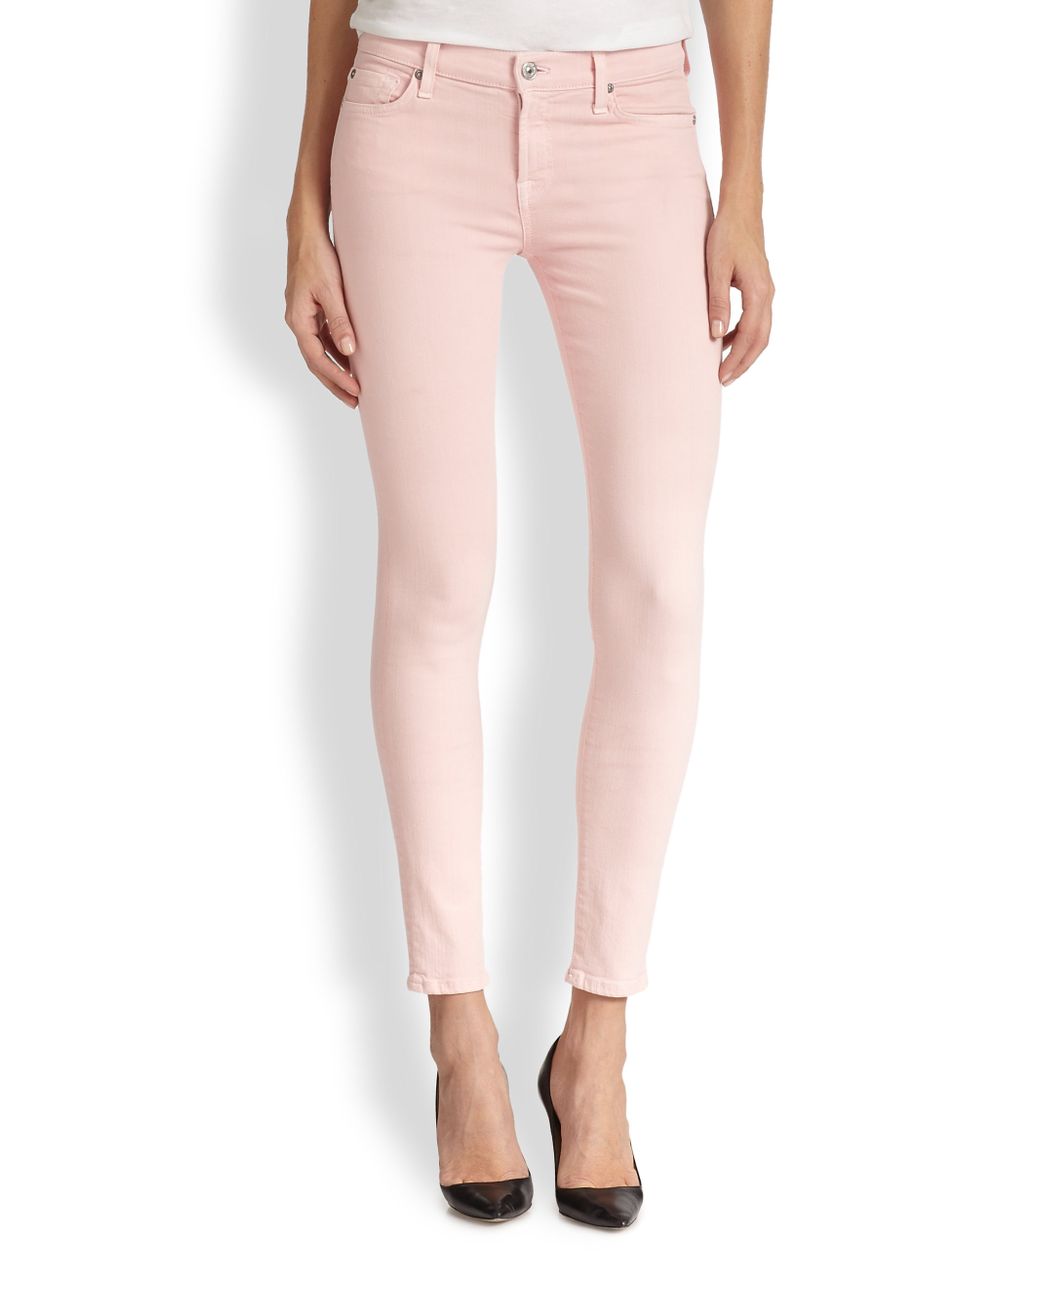 7 For All Mankind The Ankle Skinny Jeans in Pink | Lyst